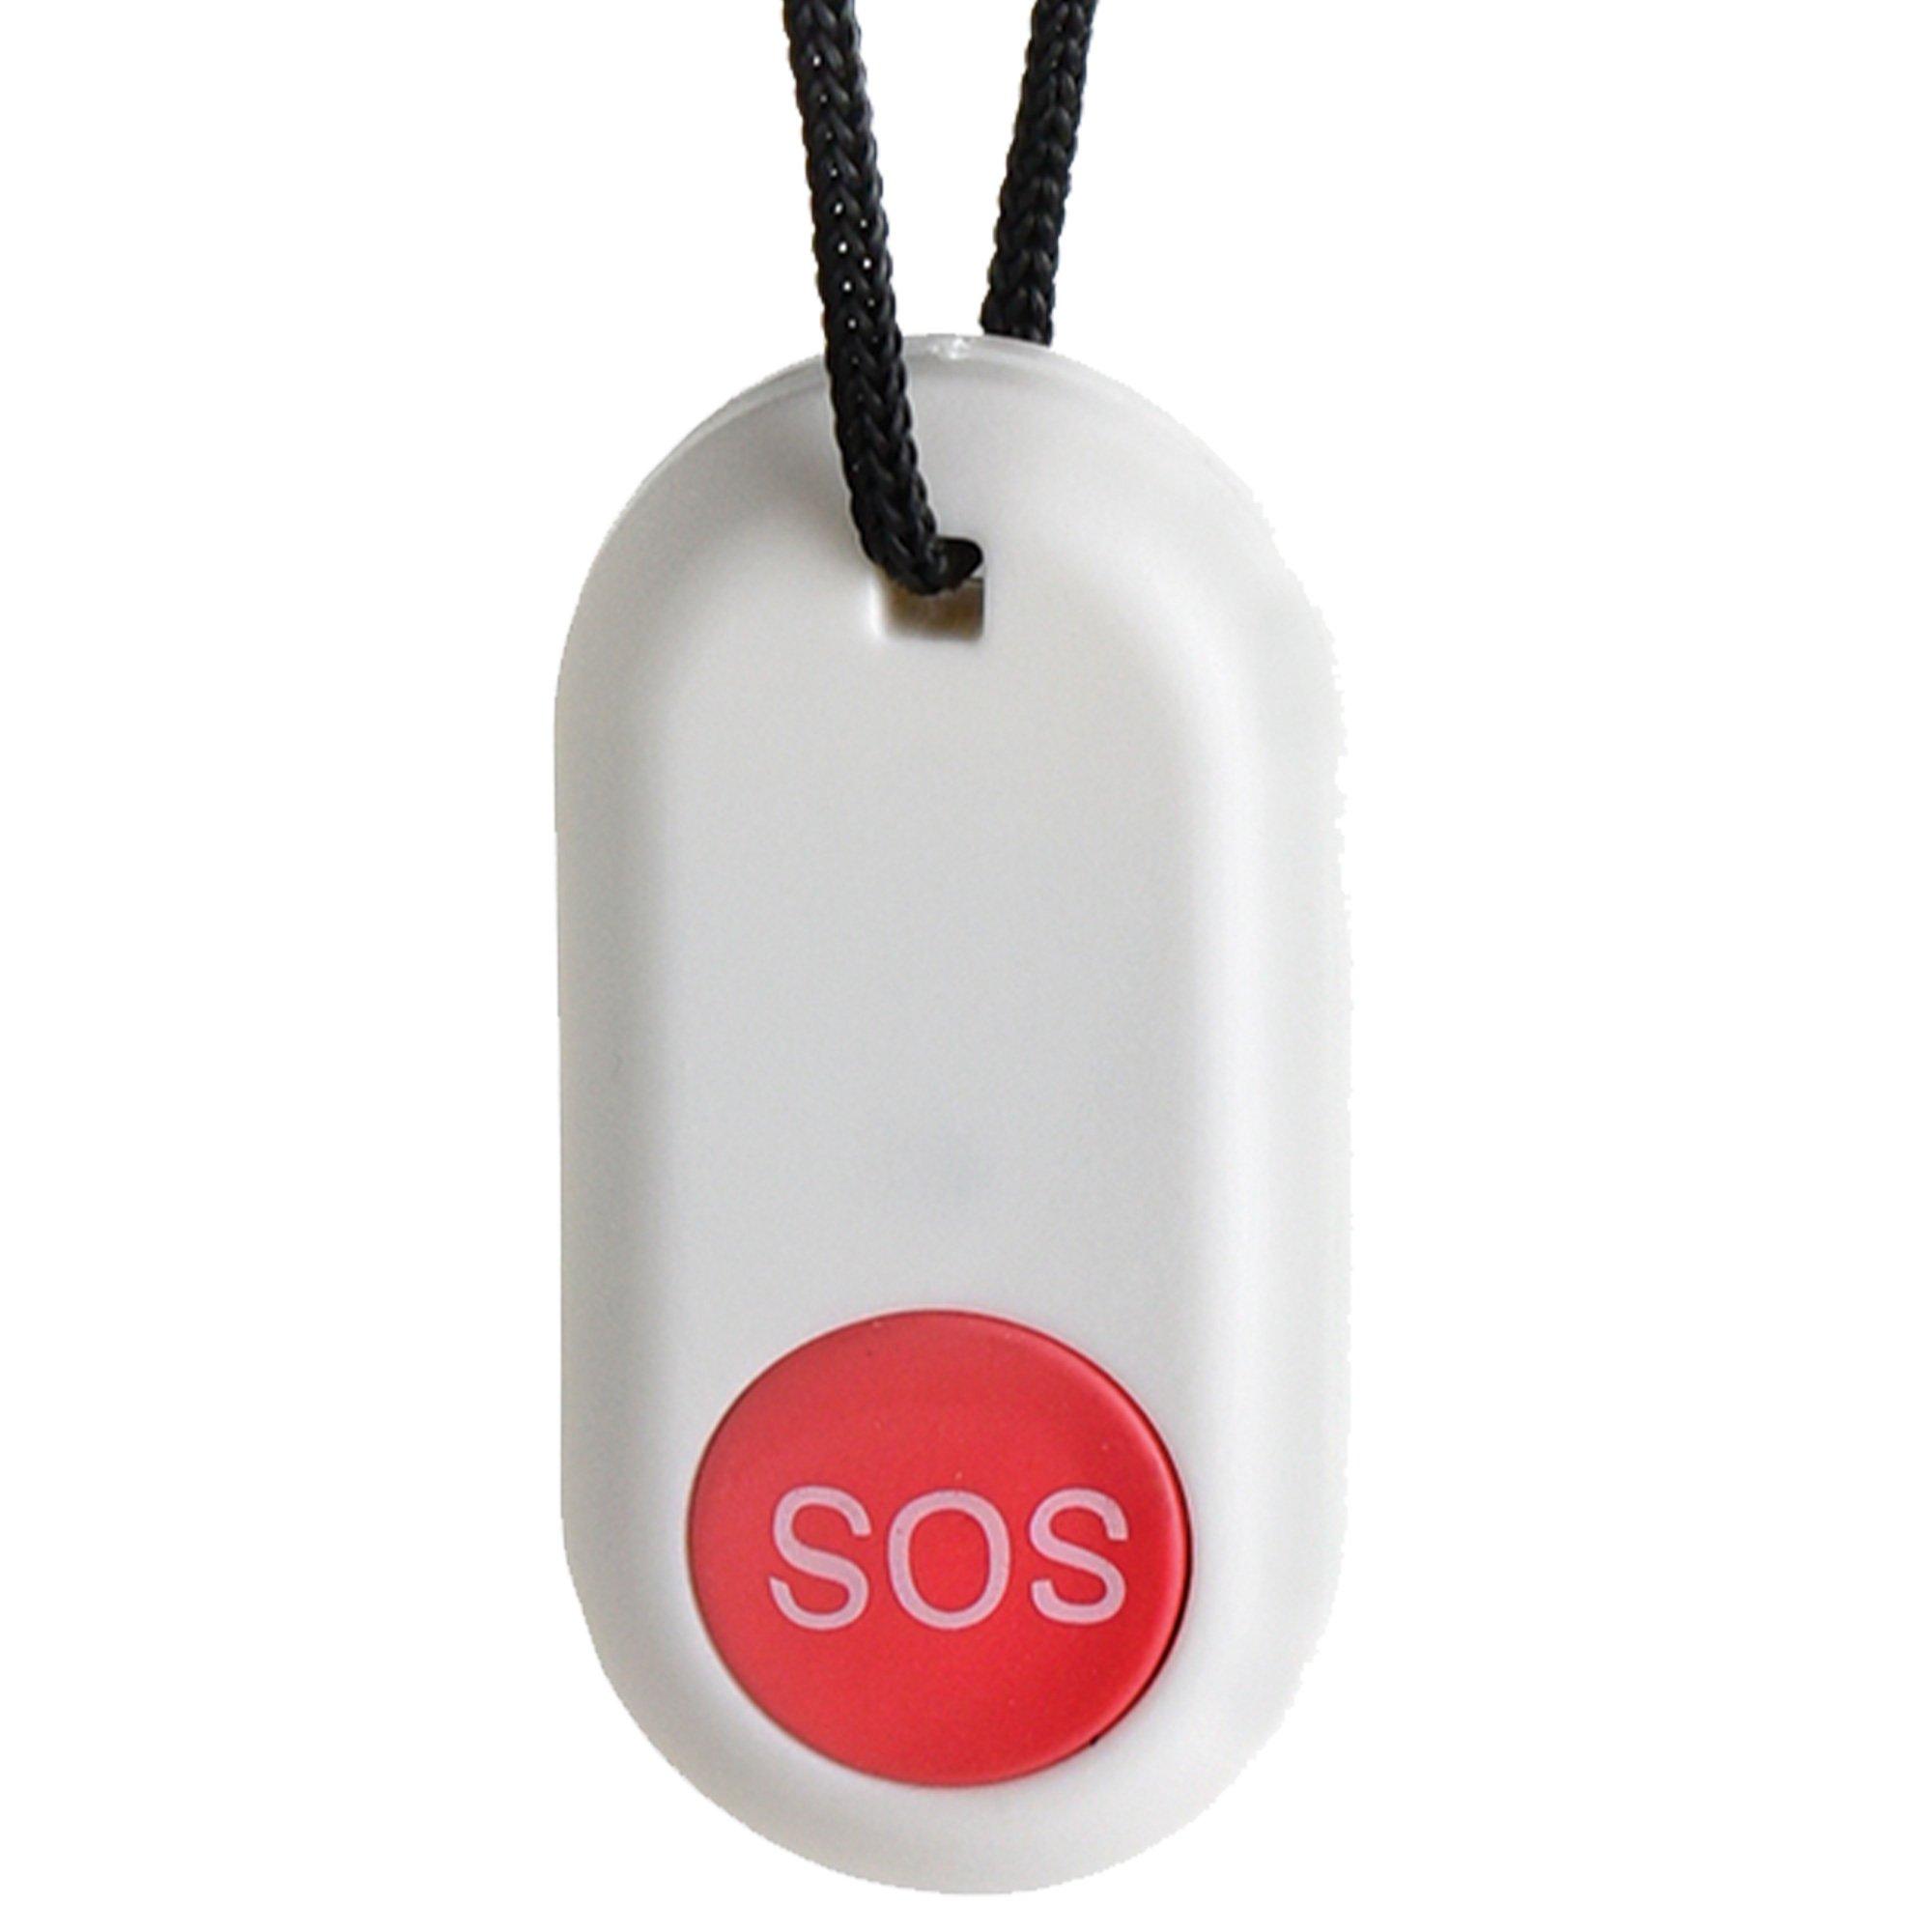 Light-Up Medical Alert Button Necklace Prop - 100th Day of School